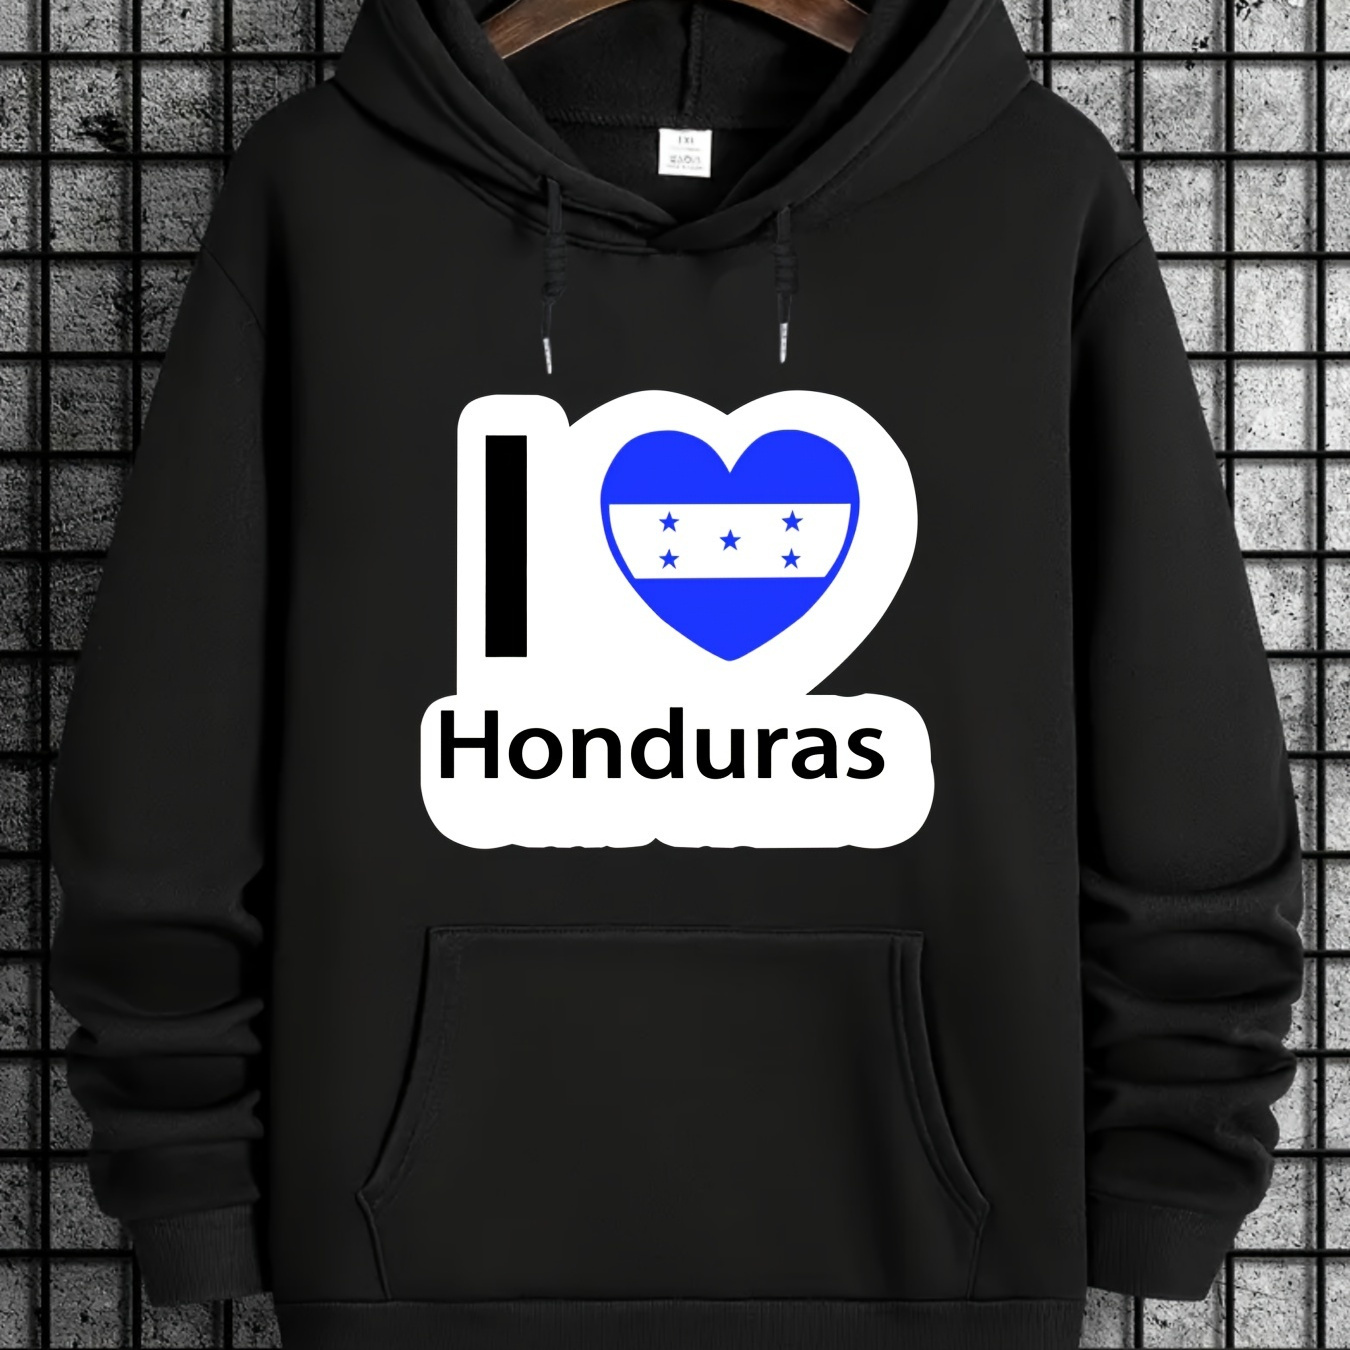 

I Love Honduras Print Men's Pullover Round Neck Hoodies With Kangaroo Pocket & Drawstring Long Sleeve Hooded Sweatshirt Loose Casual Top For Autumn Winter Men's Clothing As Holiday Gifts